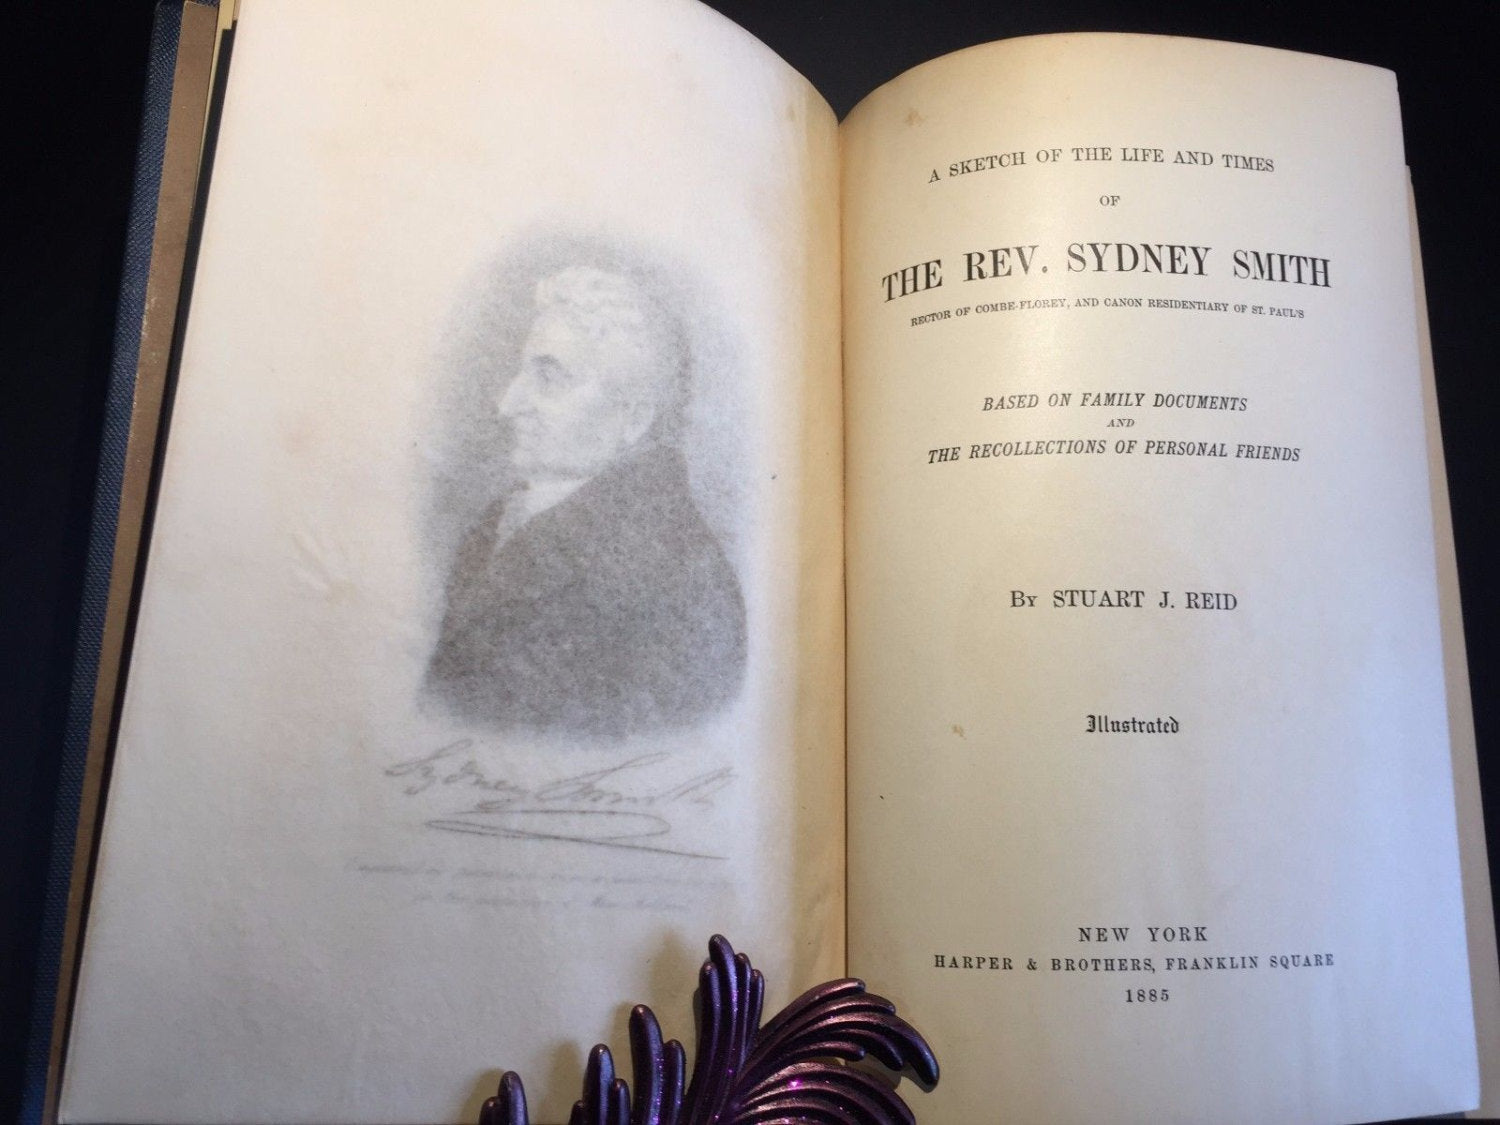 A Sketch of the Life and Times of the Rev. Sydney Smith, by Stuart J. Reid,1885